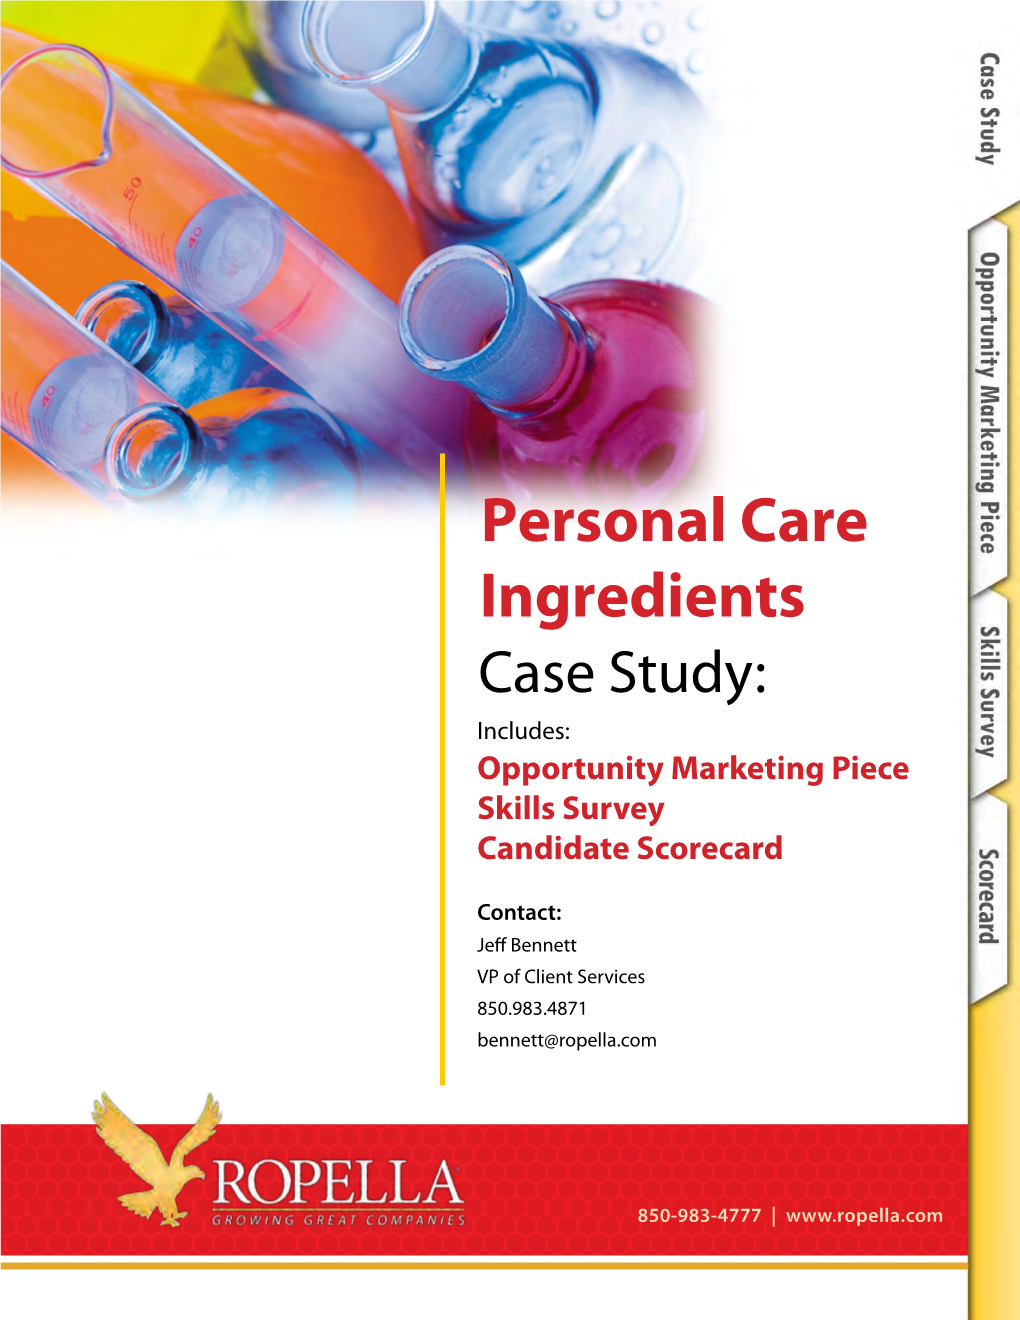 Personal Care Ingredients Case Study: Includes: Opportunity Marketing Piece Skills Survey Candidate Scorecard